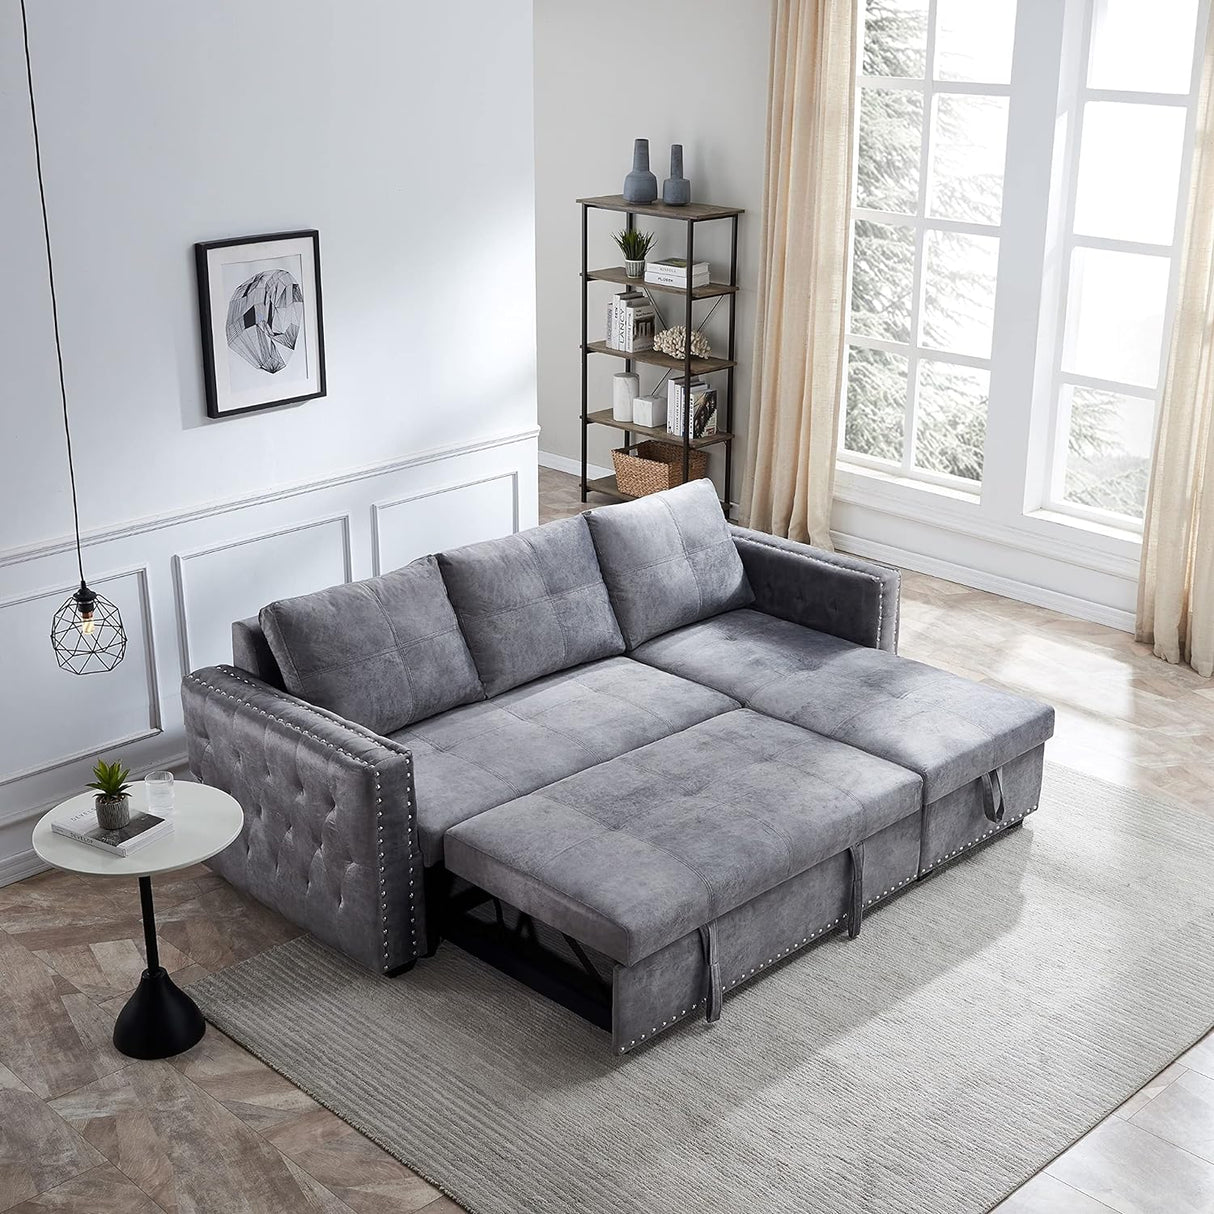 Sectional Sofa with Storage, Pull-Out Couch Sleeper, L-Shaped Corner Sofa Bed with Lounge Chaise, 3 Seater Furniture Set for Living Room (Gray)